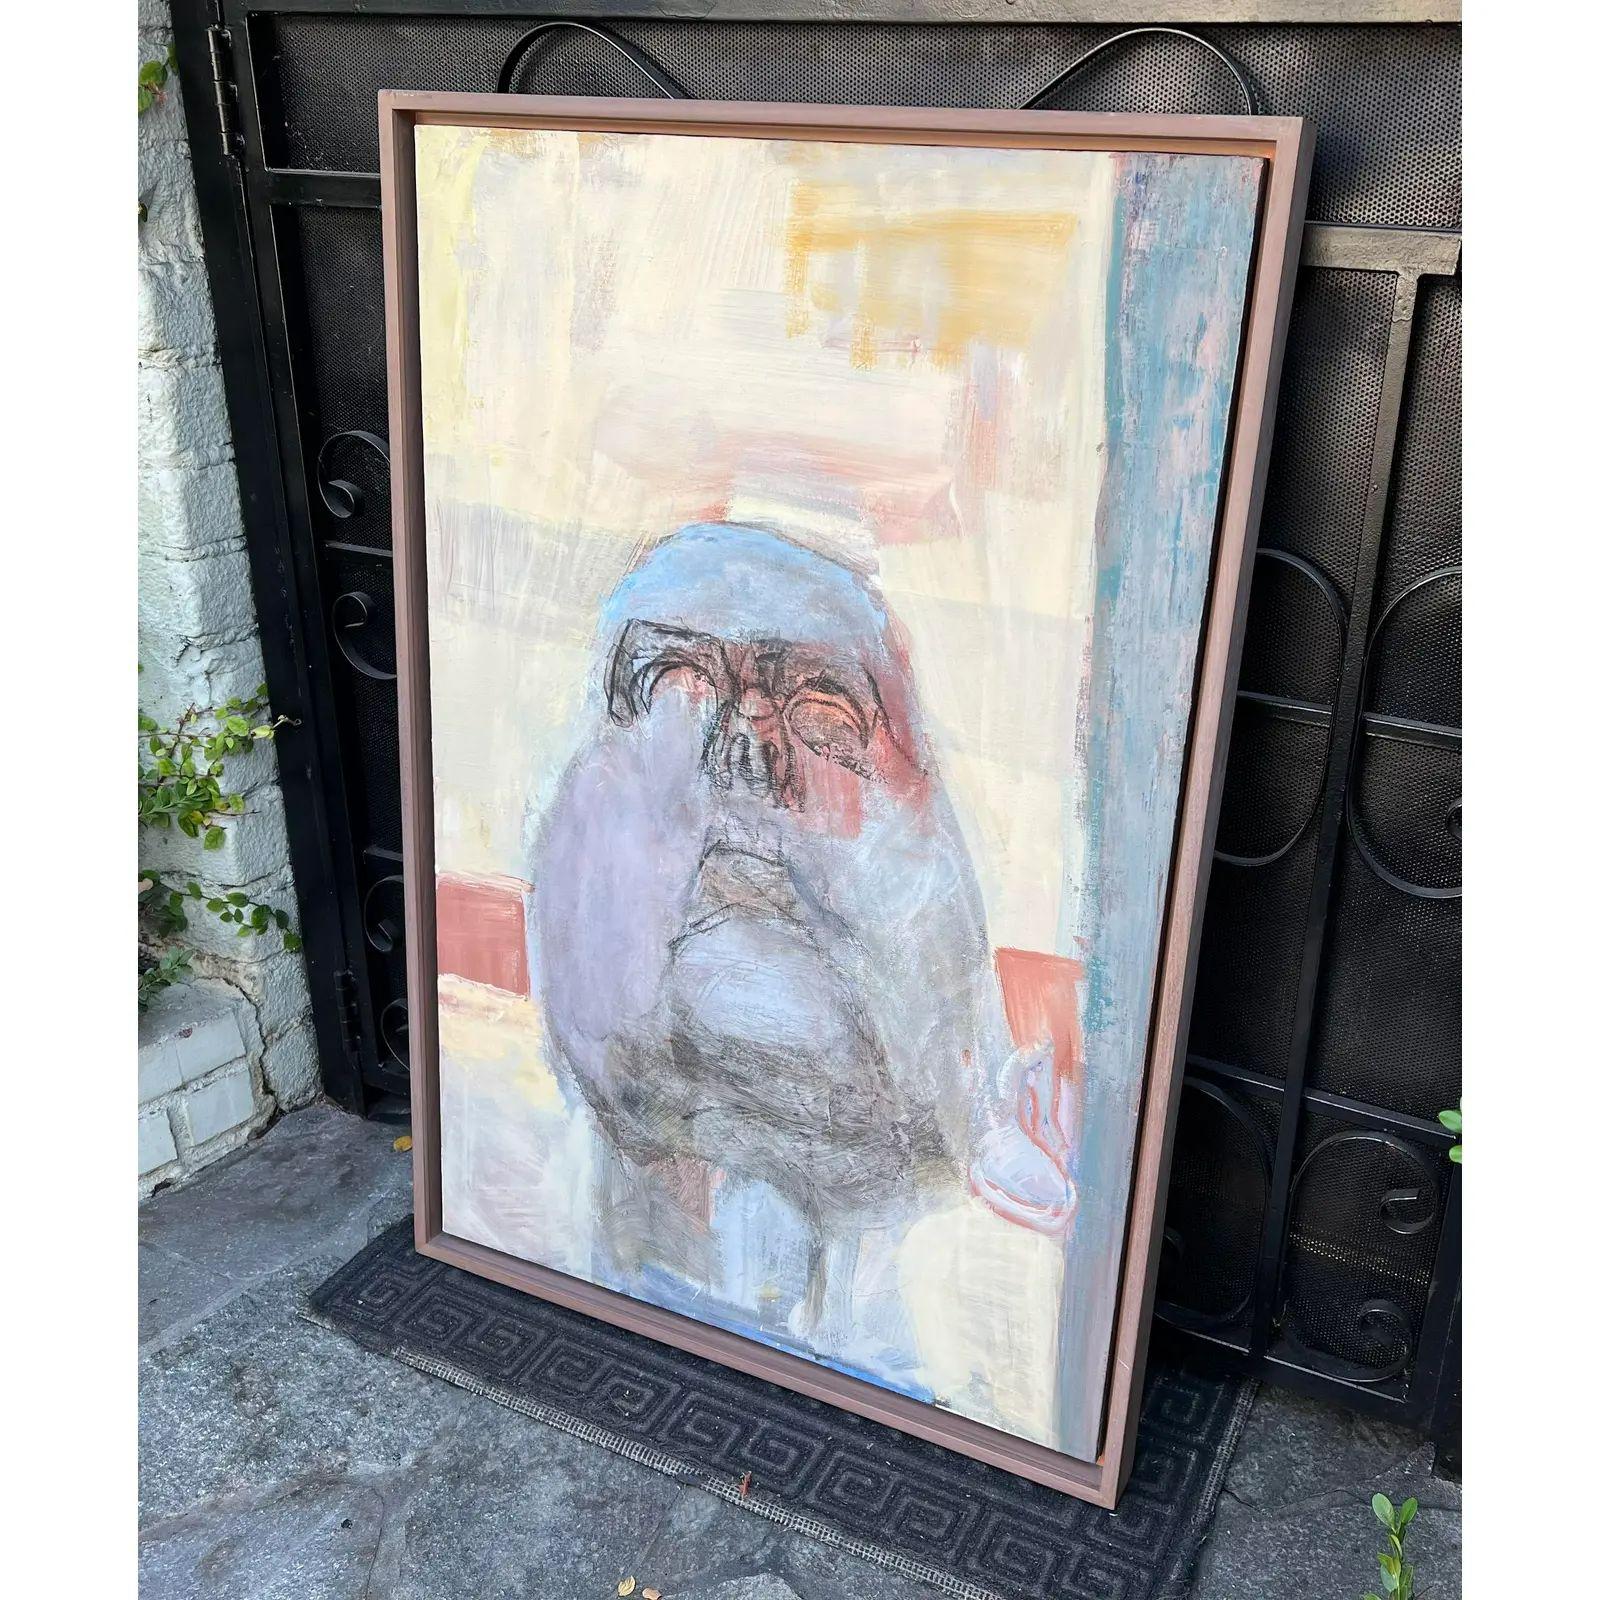 Modern “Head Looking Up” painting by Jim Farrington. Provenance illustrated in photos.

Additional information: 
Materials: Canvas, paint
Color: Tan
Period: 1980s
Art Subjects: Abstract, Figure, Other
Styles: Modern
Frame type: Framed
Item